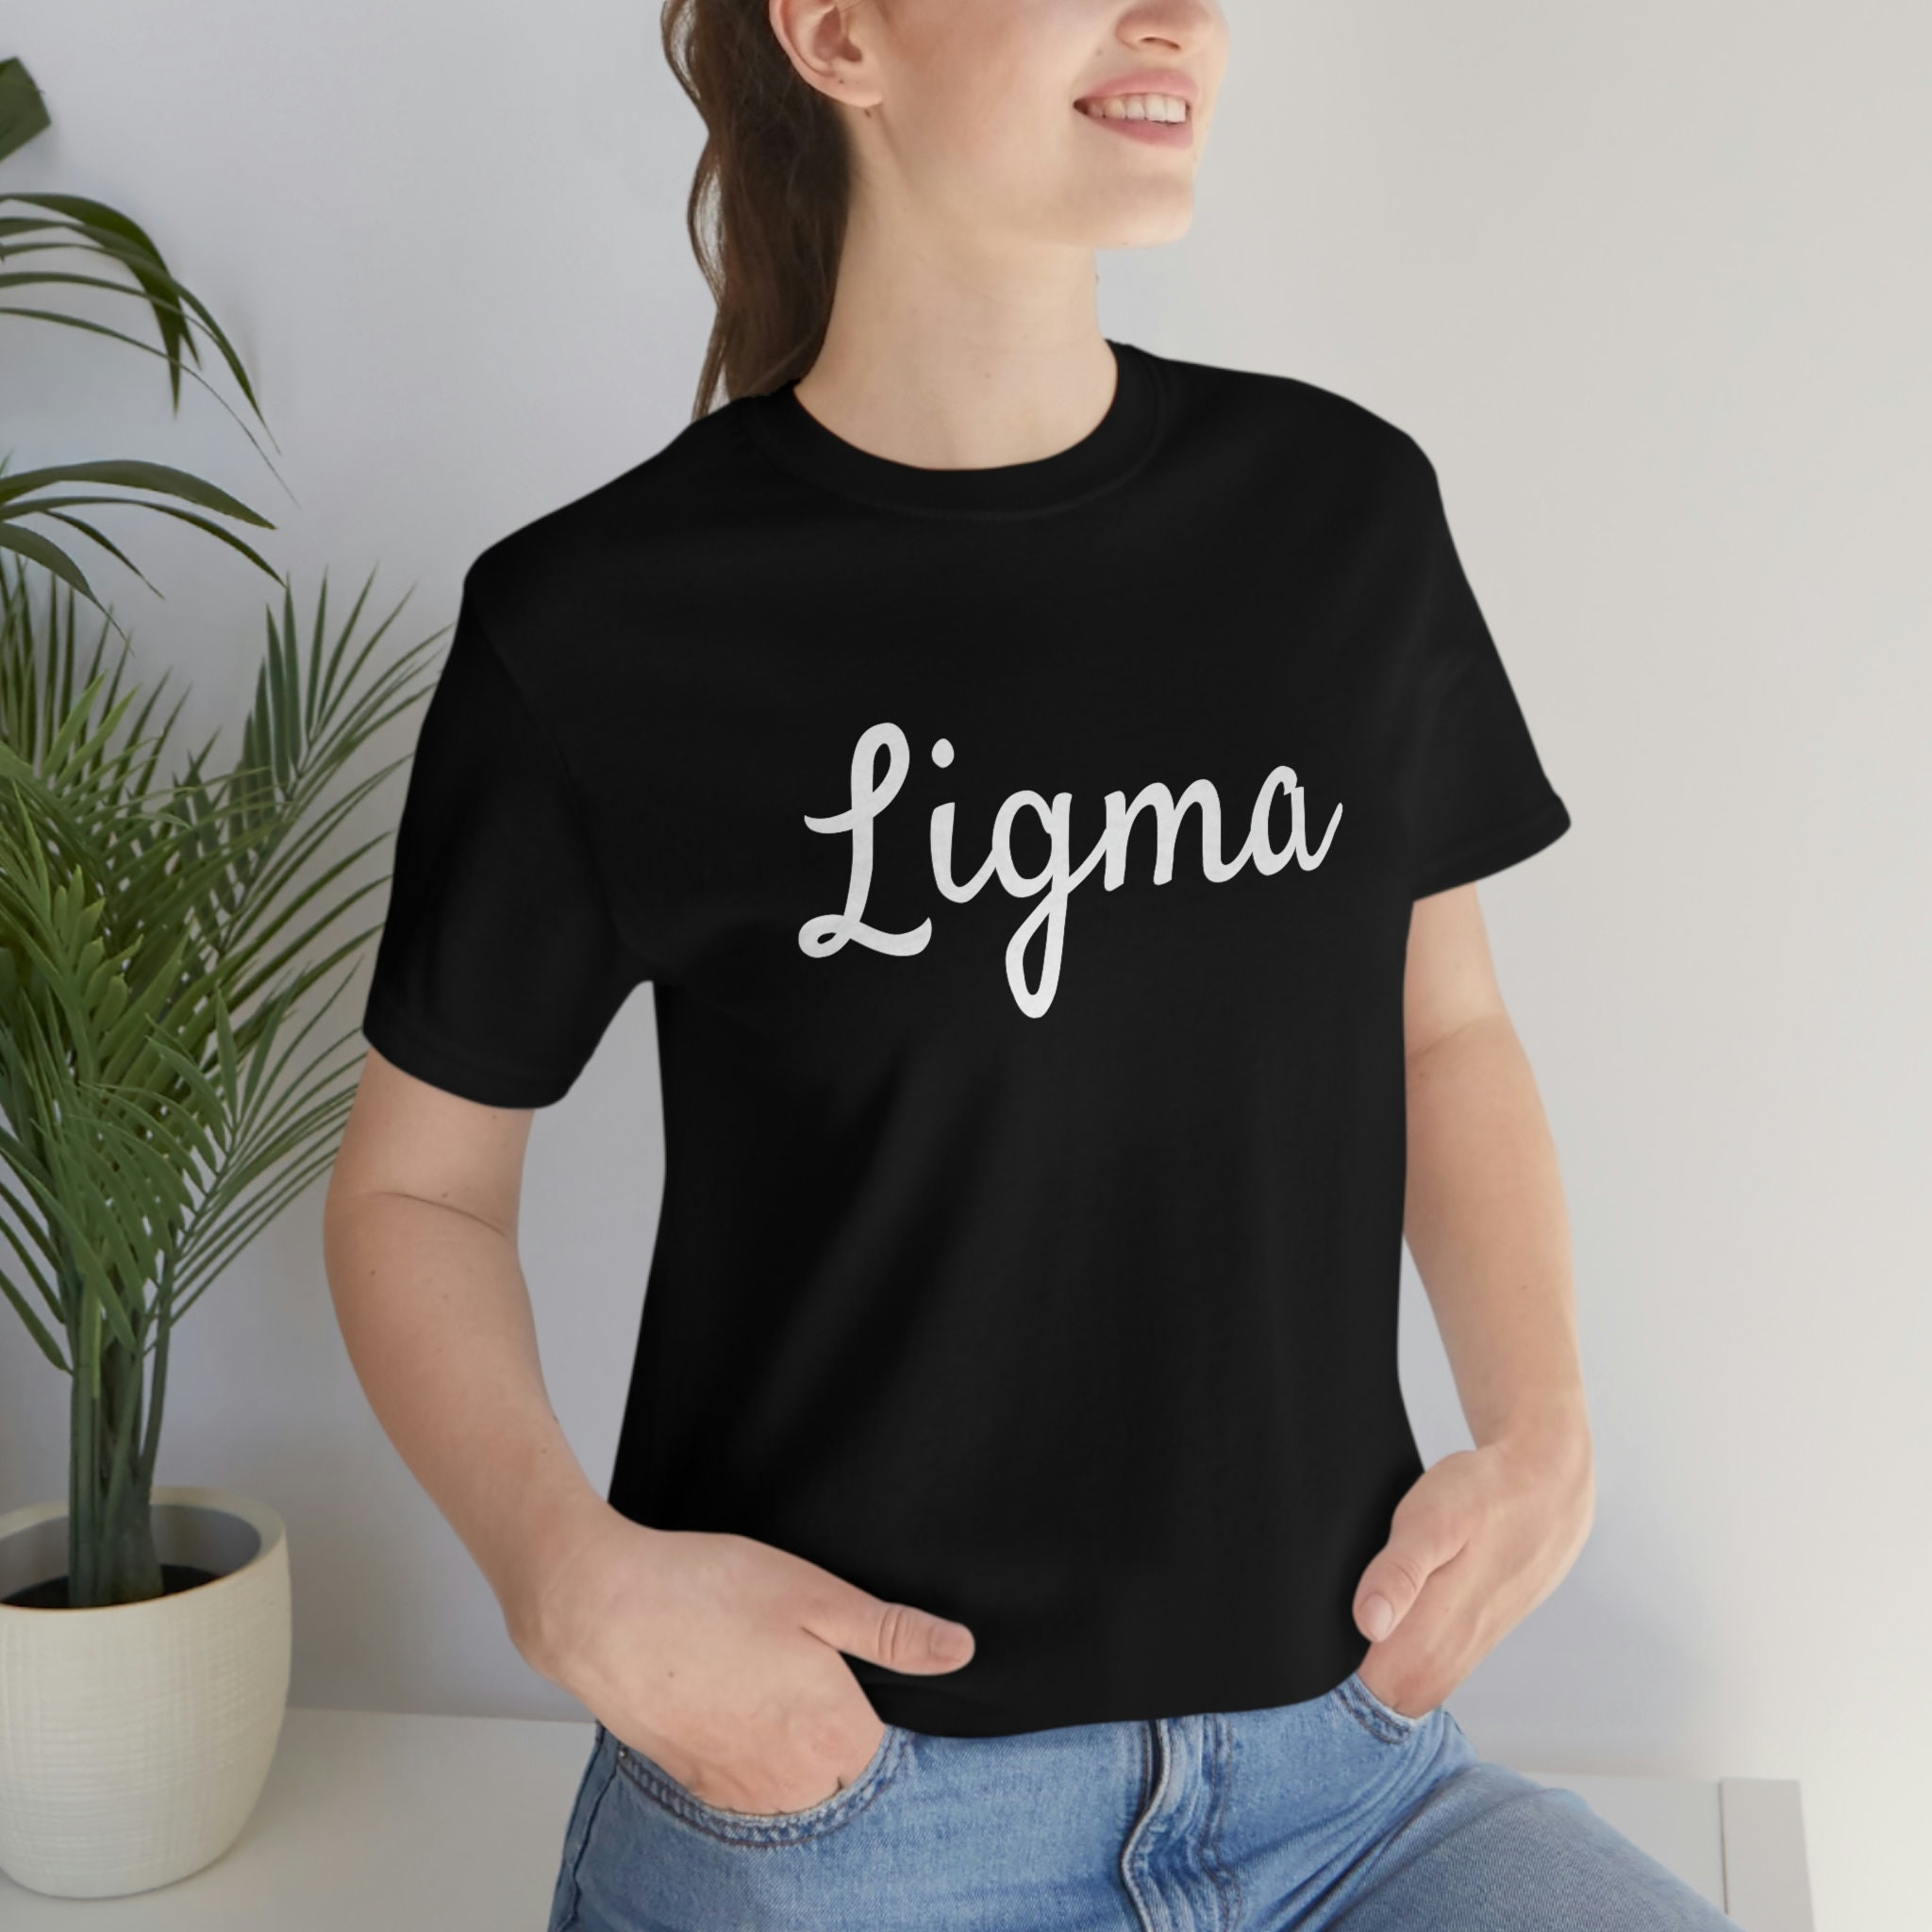 Ligma Balls Gifts & Merchandise for Sale